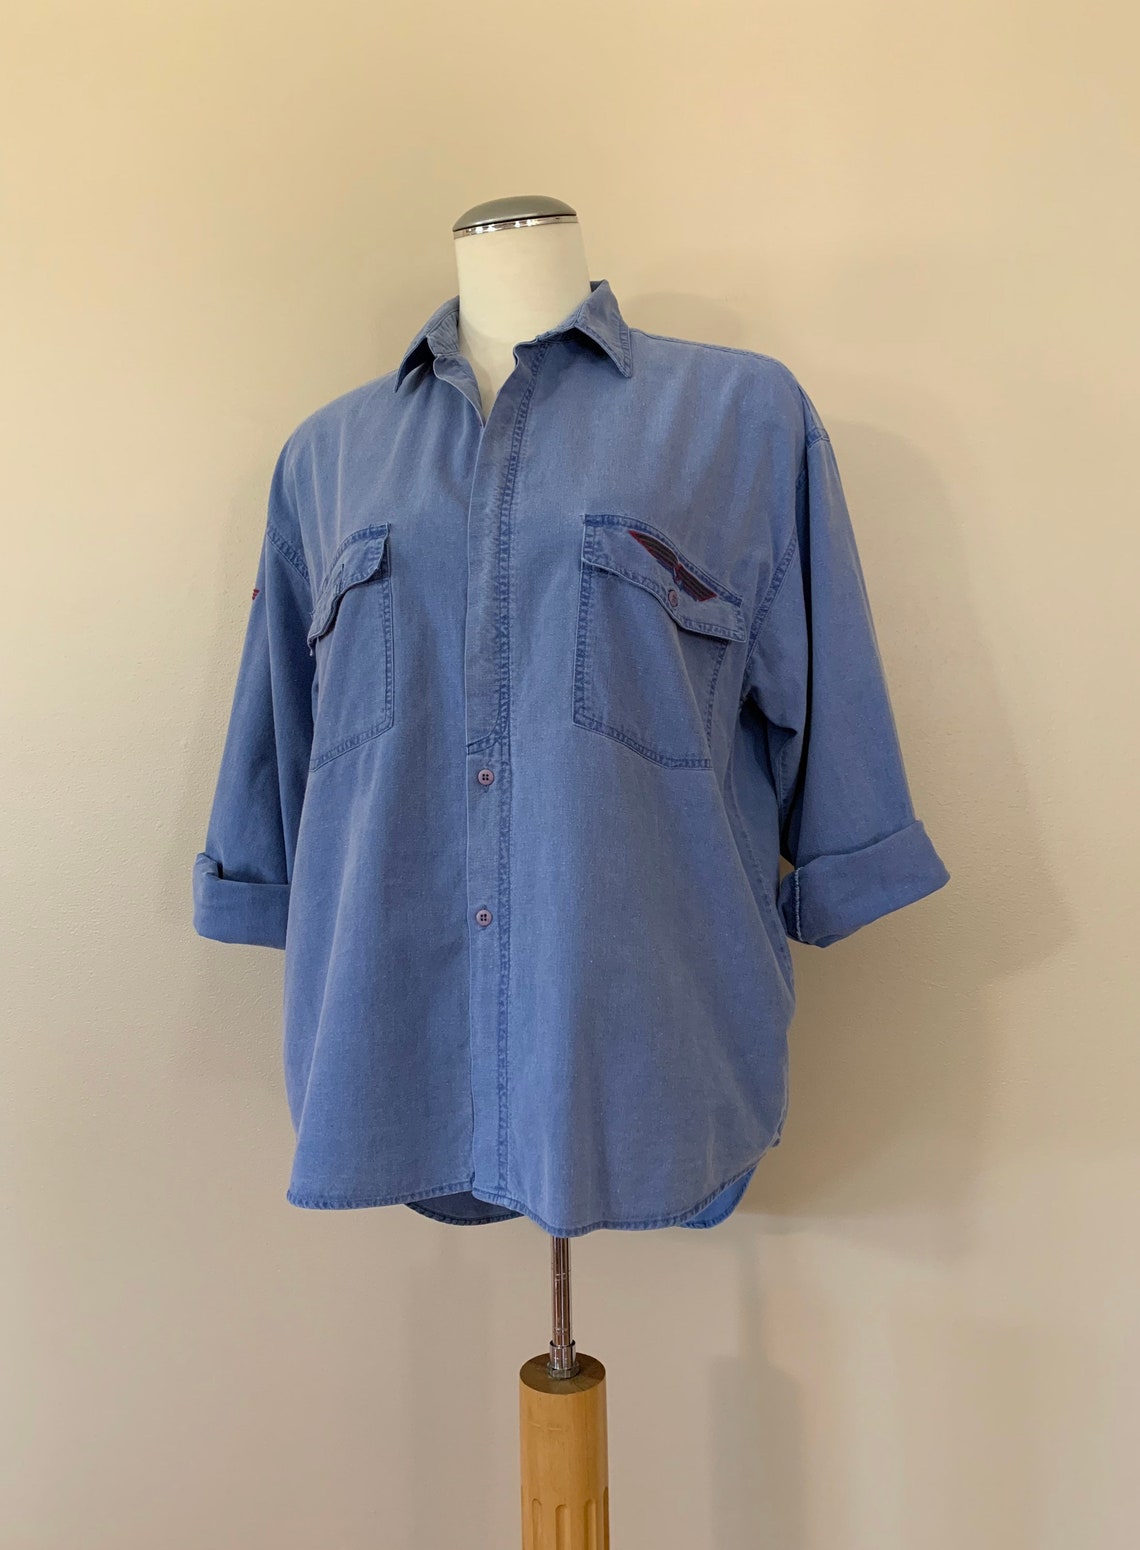 90s Bugle Boy Button Down Shirt Large / Oversized Button Down - Etsy